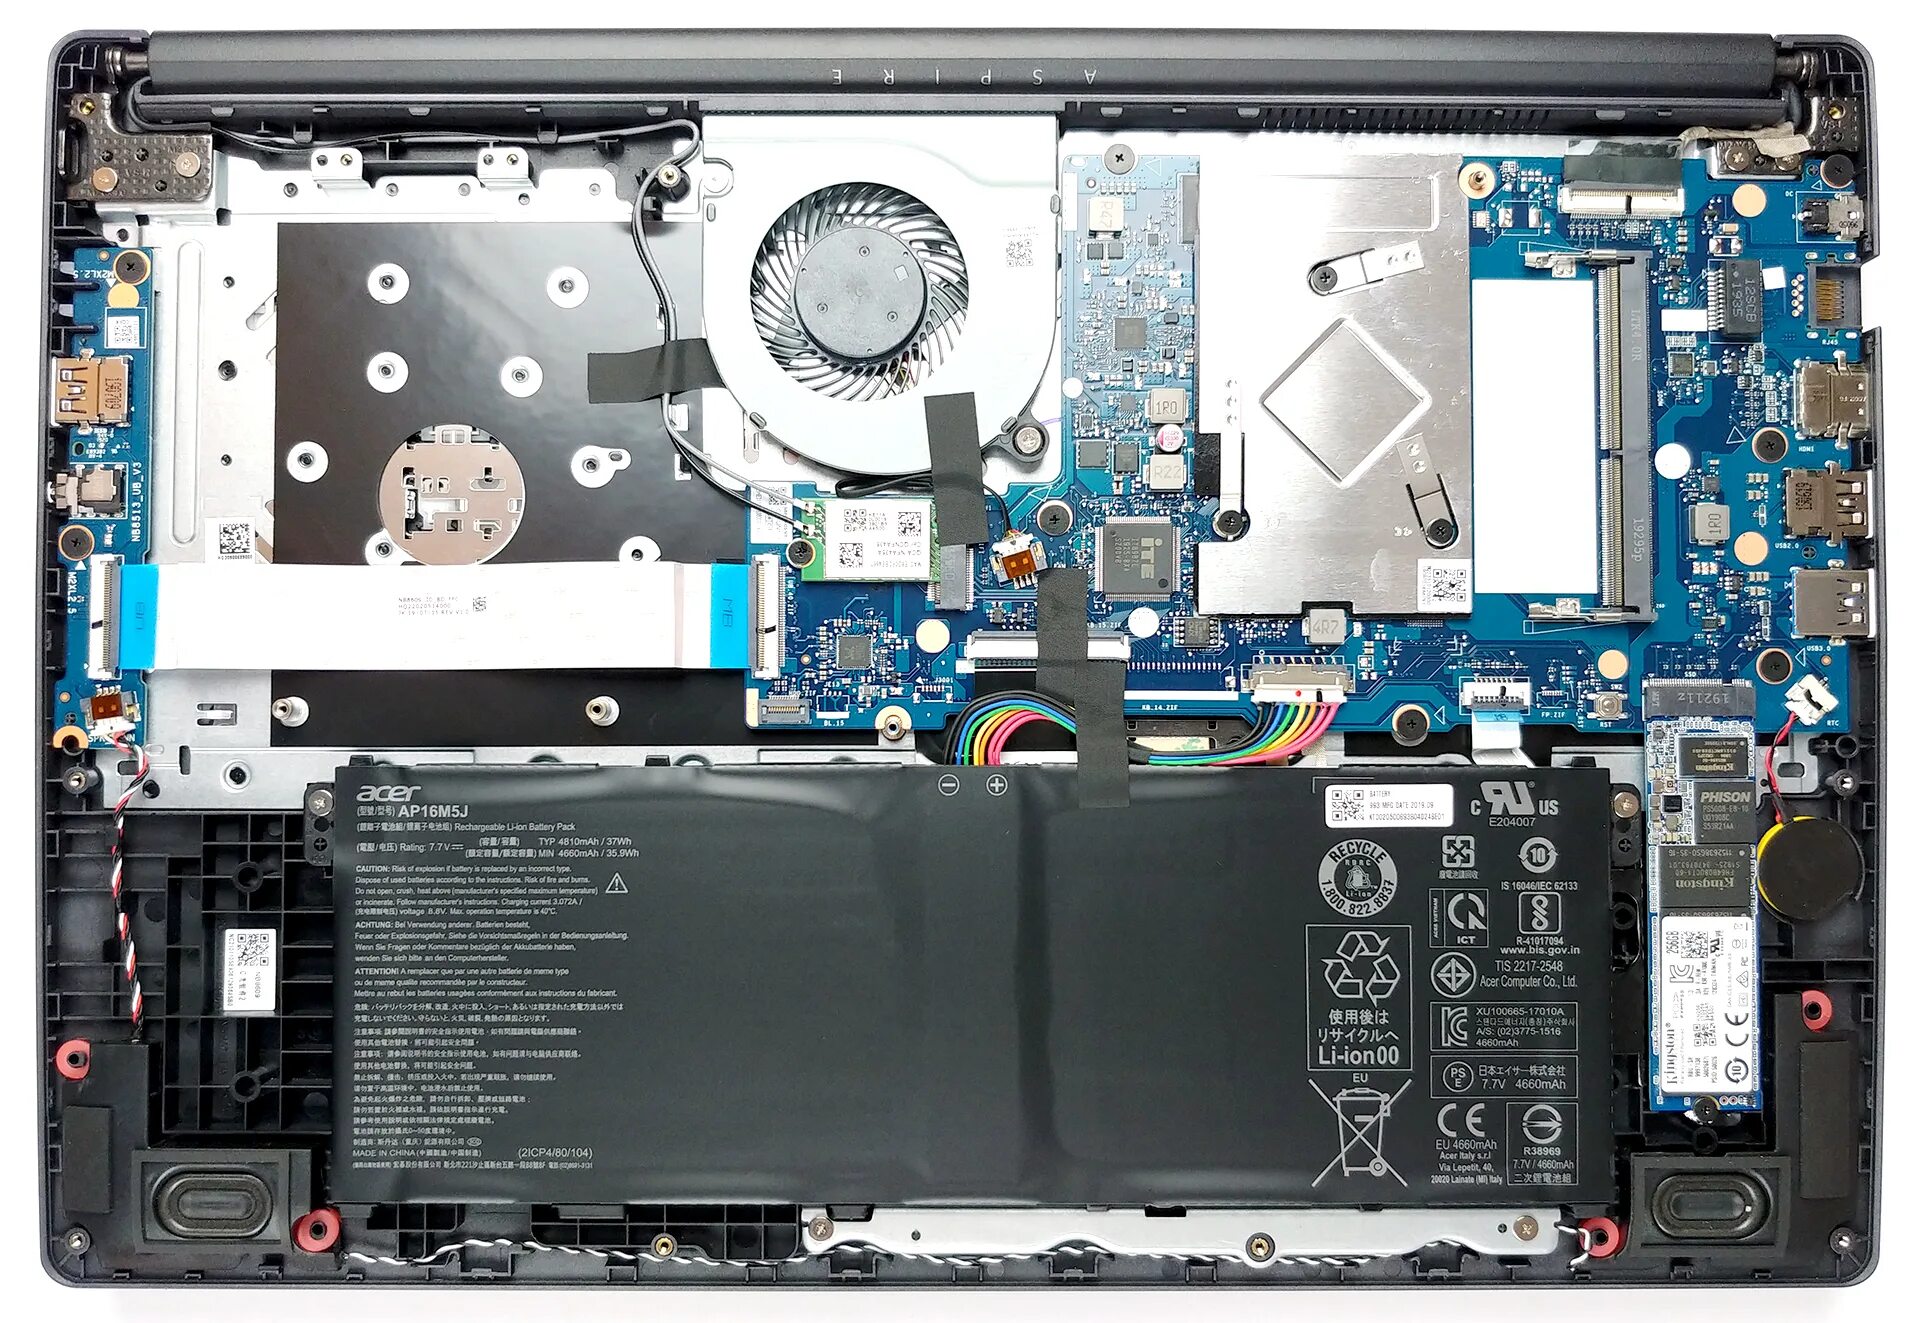 Aspire запчасти. Acer Aspire 3 a315-34. Jhdd1 Acer Aspire 3. Acer Aspire 3 a315-31. Aspire 3 a315-34 c3vd.